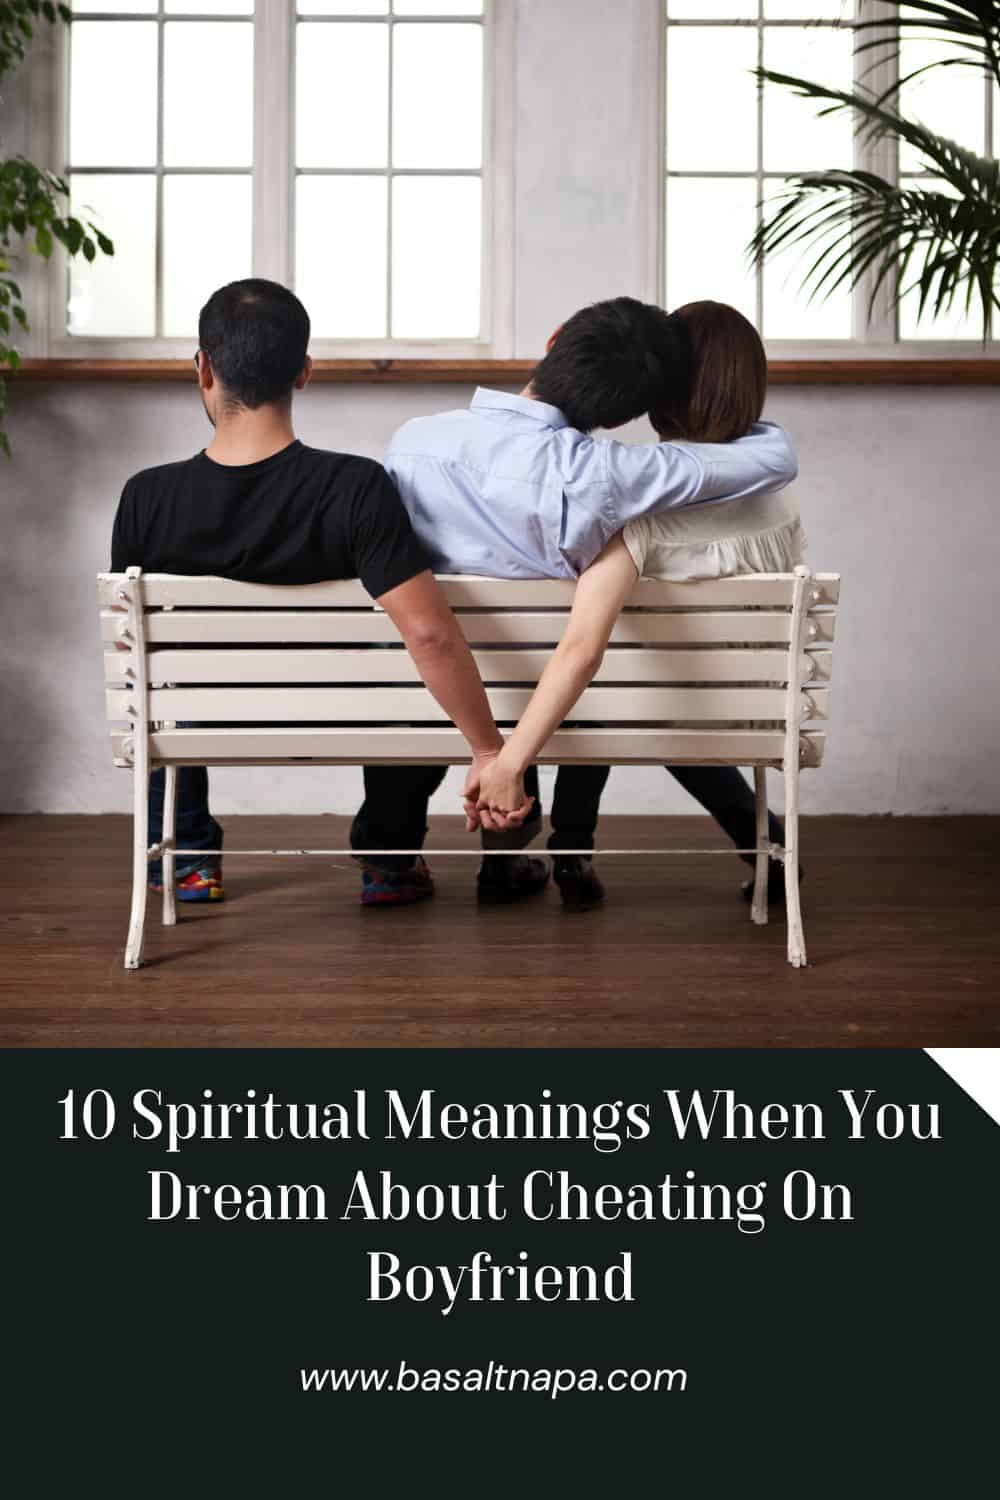 Dreaming About Cheating on Your Boyfriend: 10 Meanings and Interpretations